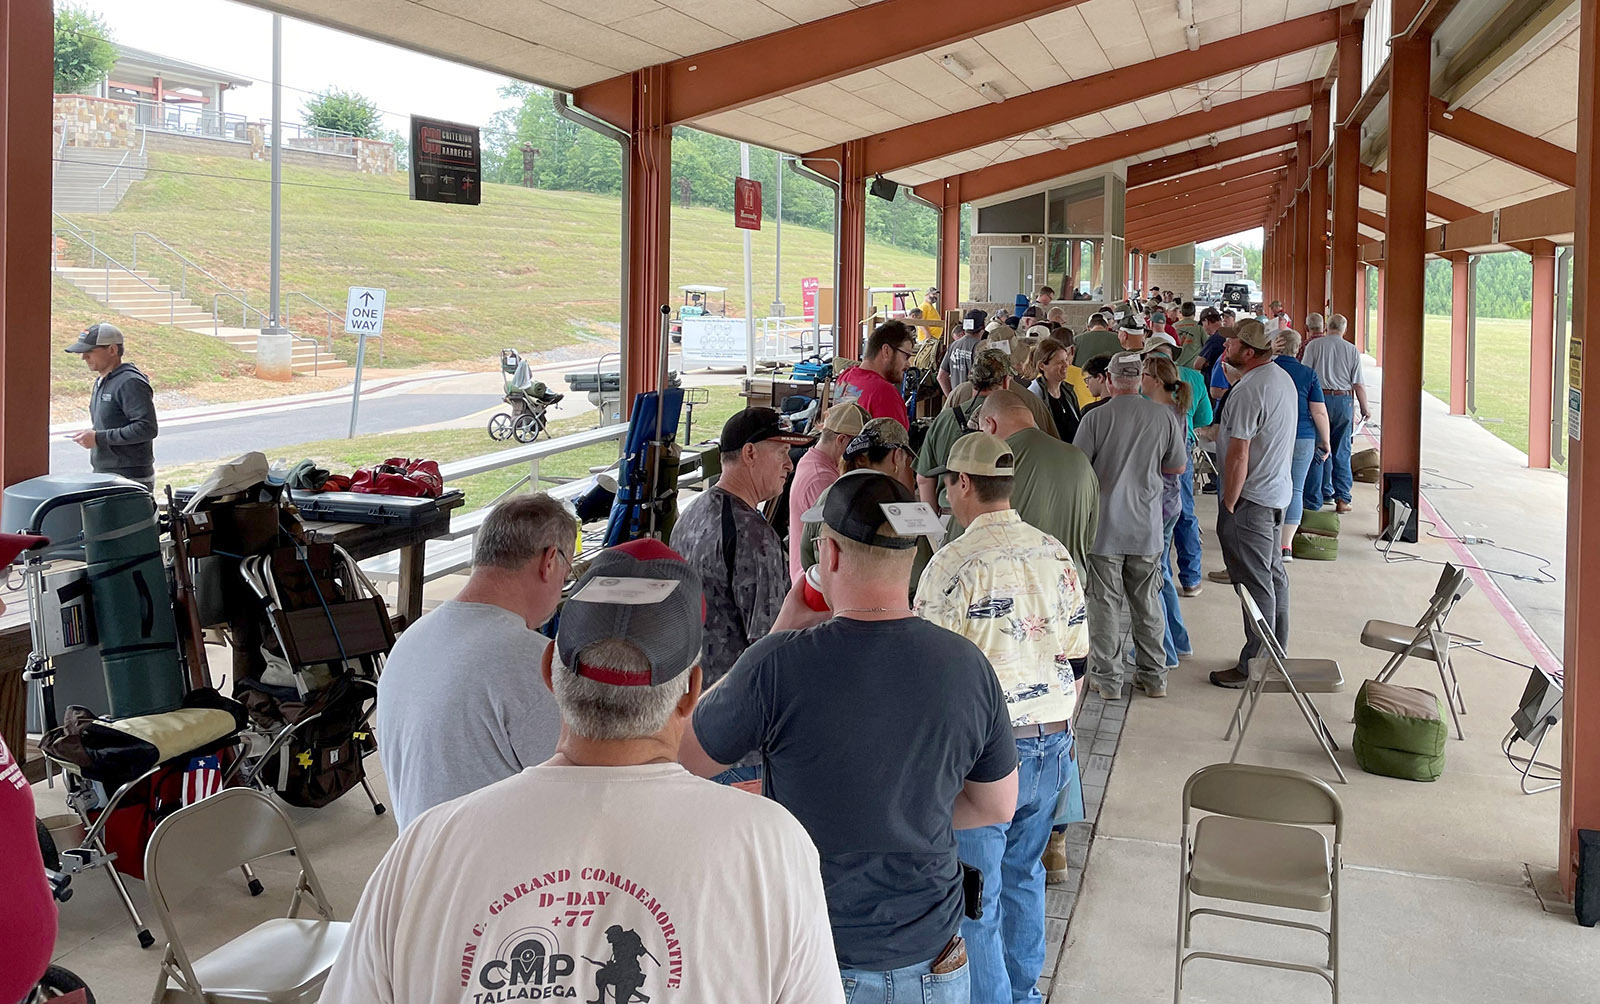 Shooting teams in line to receive their shooting positions in preparation for the Vintage Sniper Match.